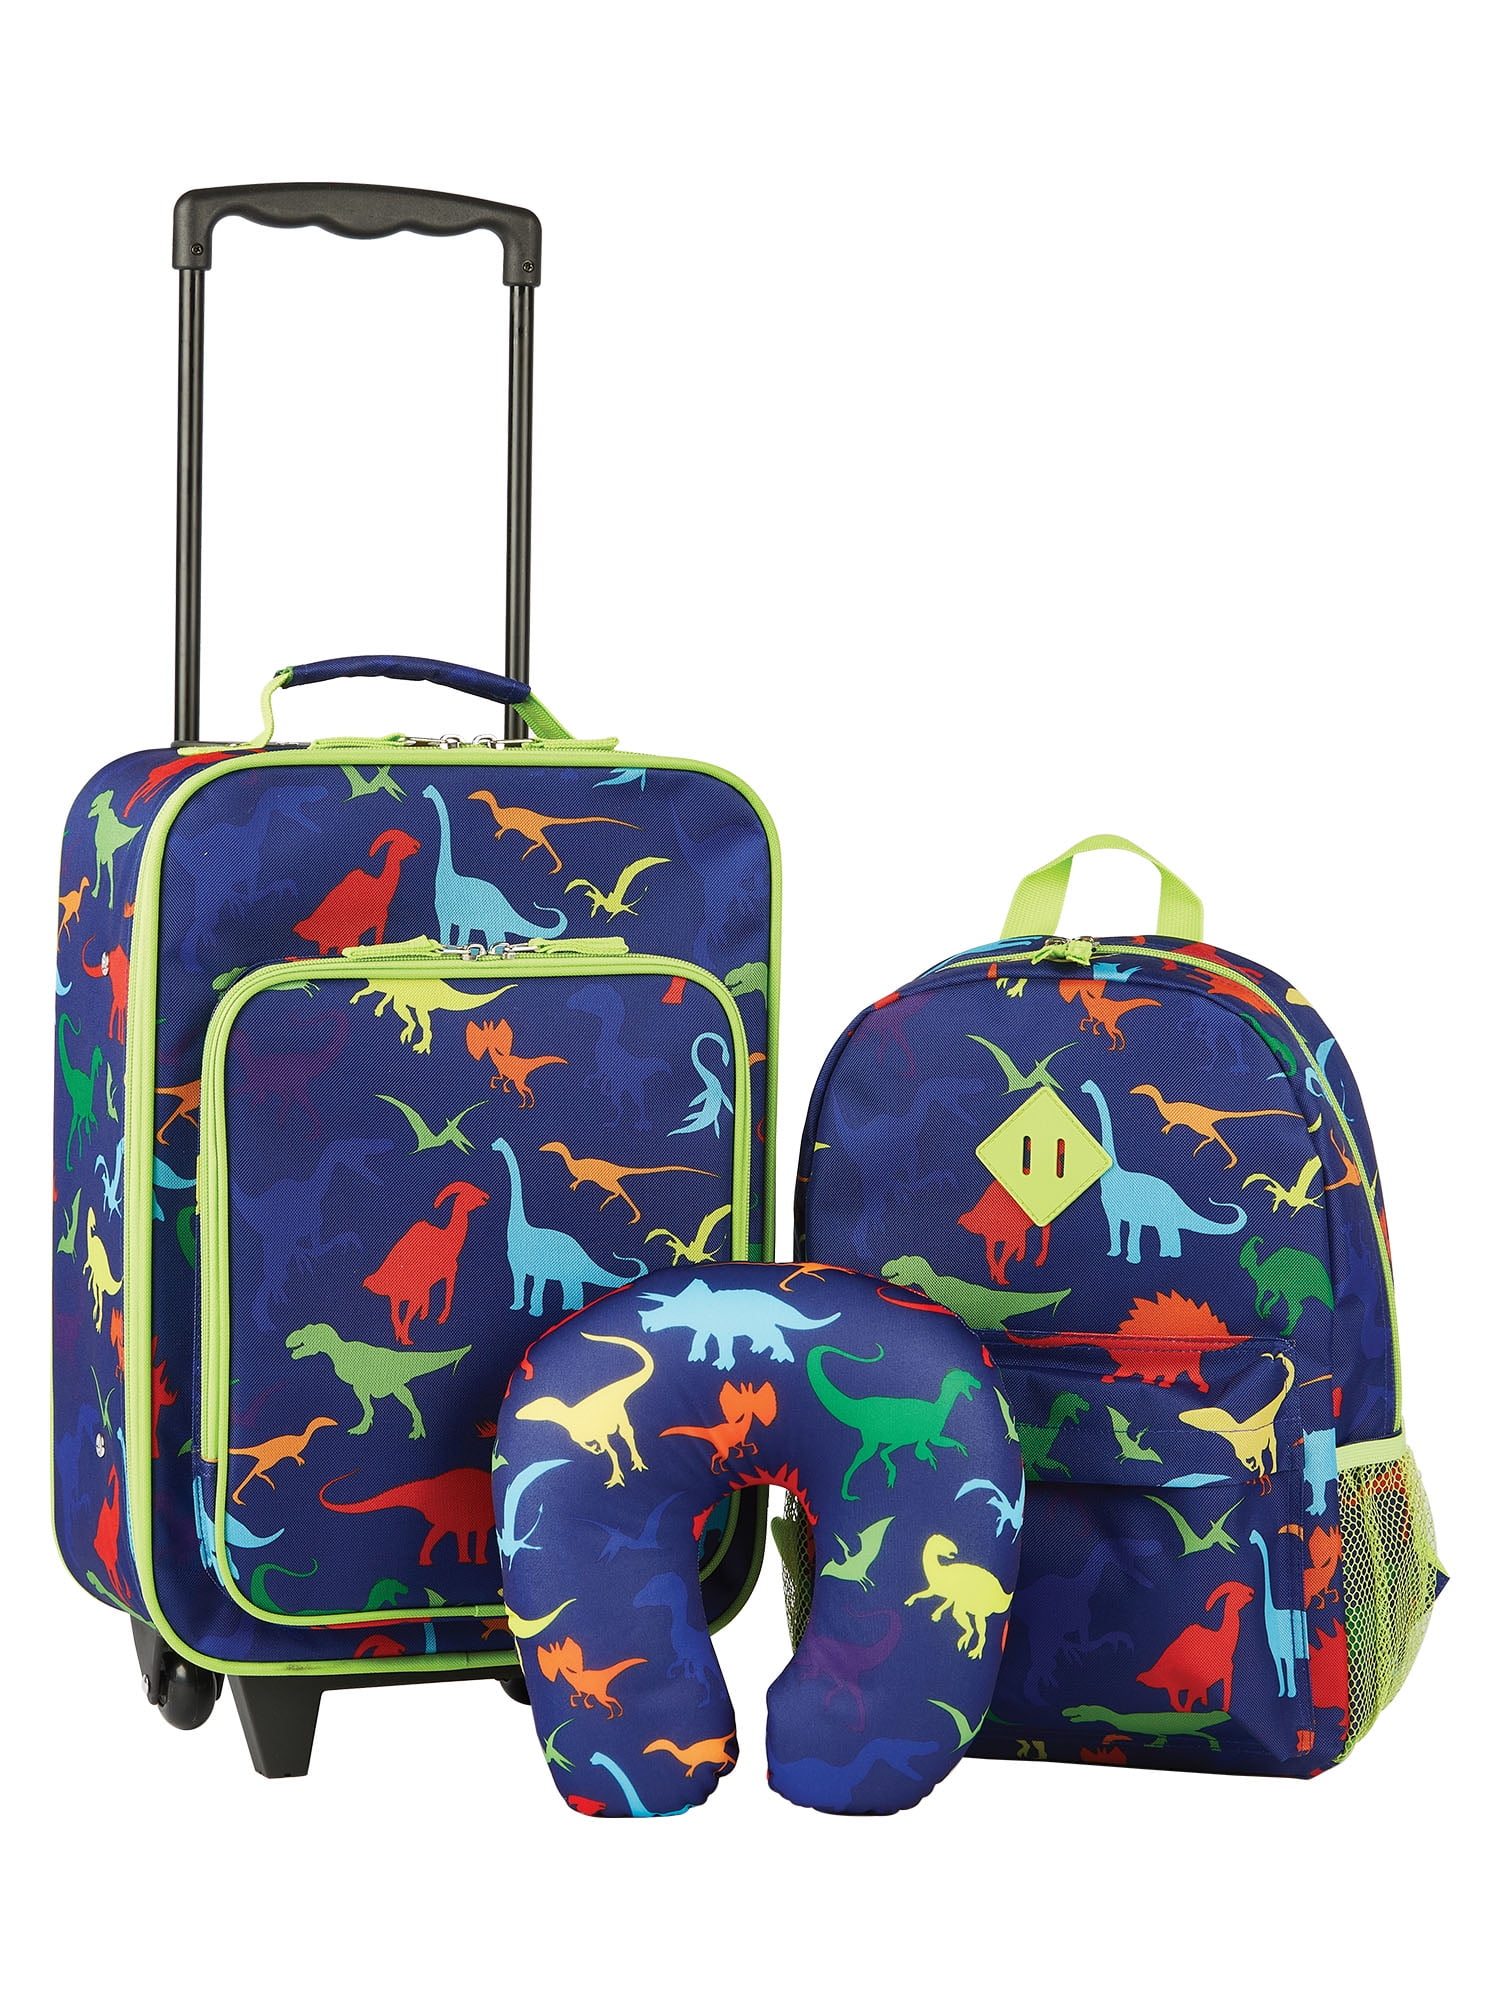 Cartoon Lightweight Carry On Suitcase for 3 4 5 Year Olds Boys Toddlers Children Travel iPlay iLearn LU-NWDS-152 Hard Shell Backpack Kids Dinosaur 18” Luggage Set